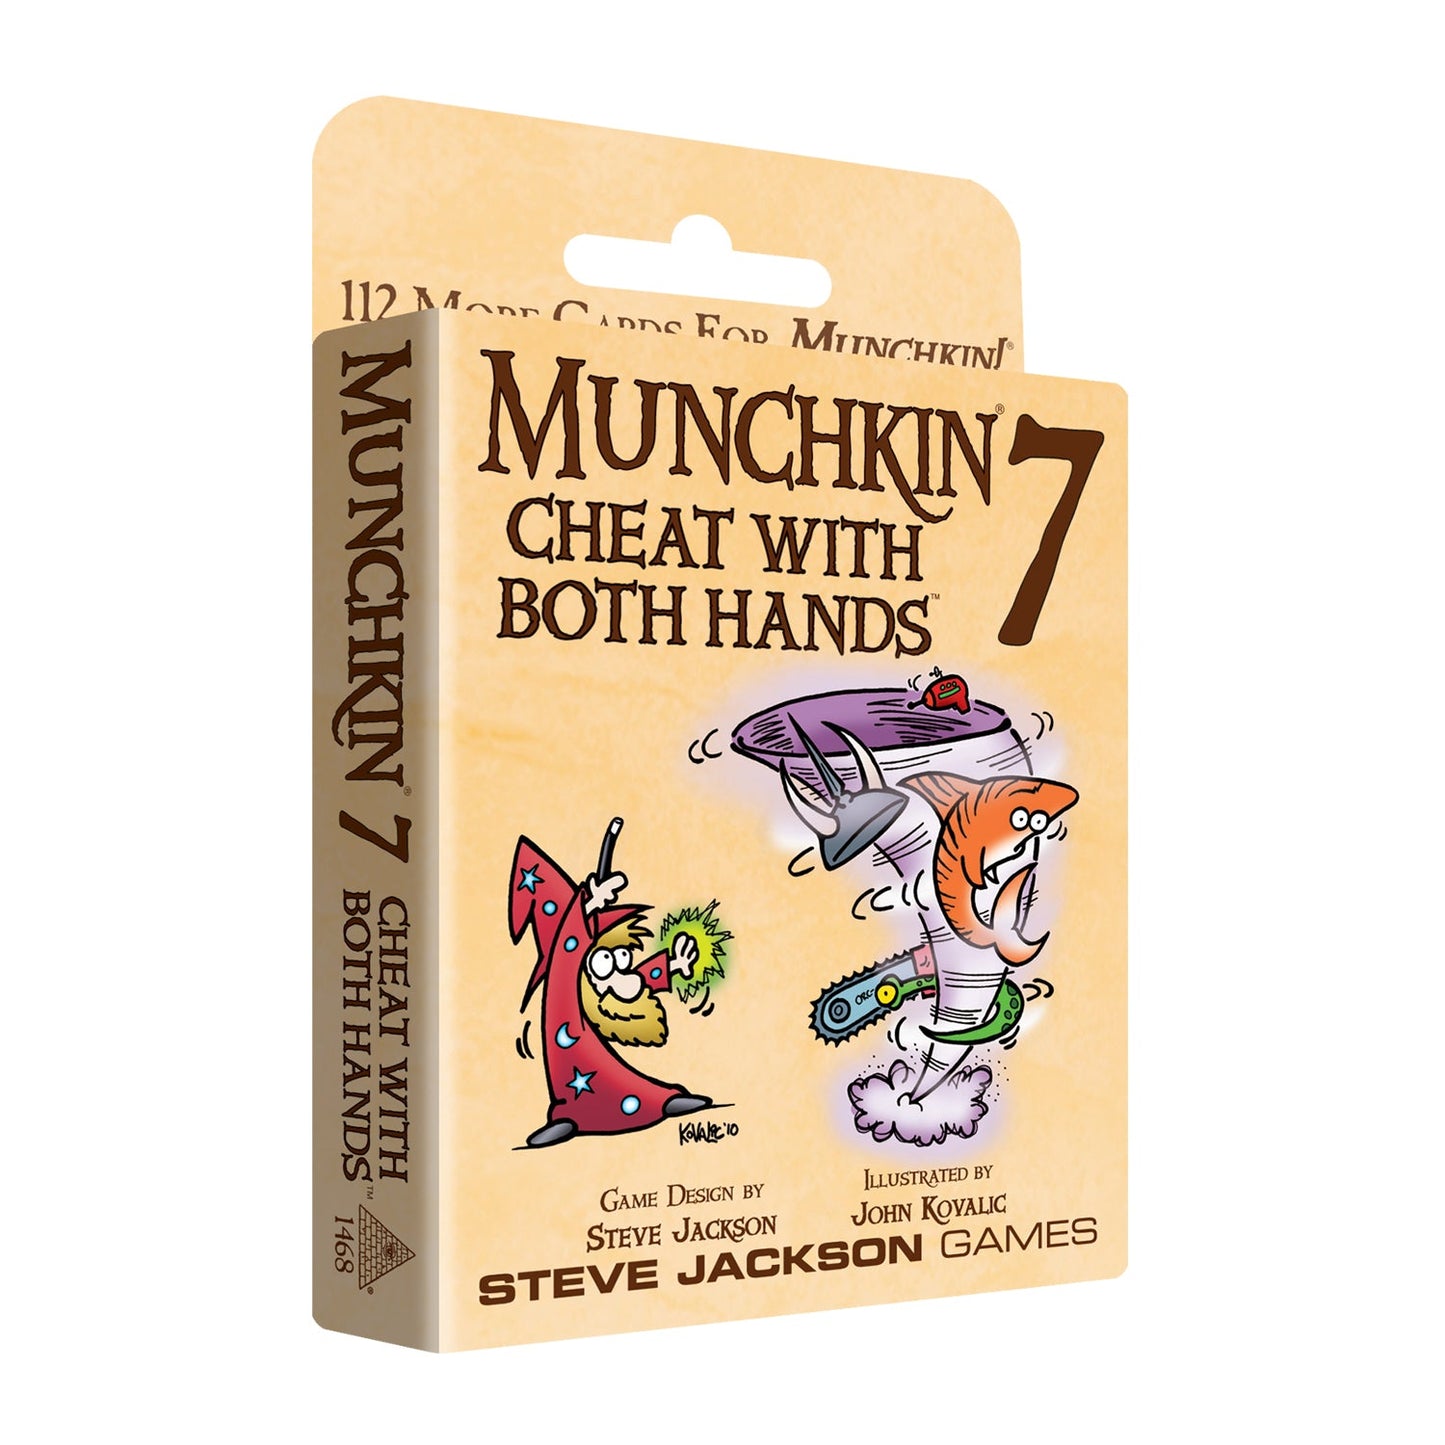 Munchkin 7 - Cheat With Both Hands Card Games Steve Jackson Games 